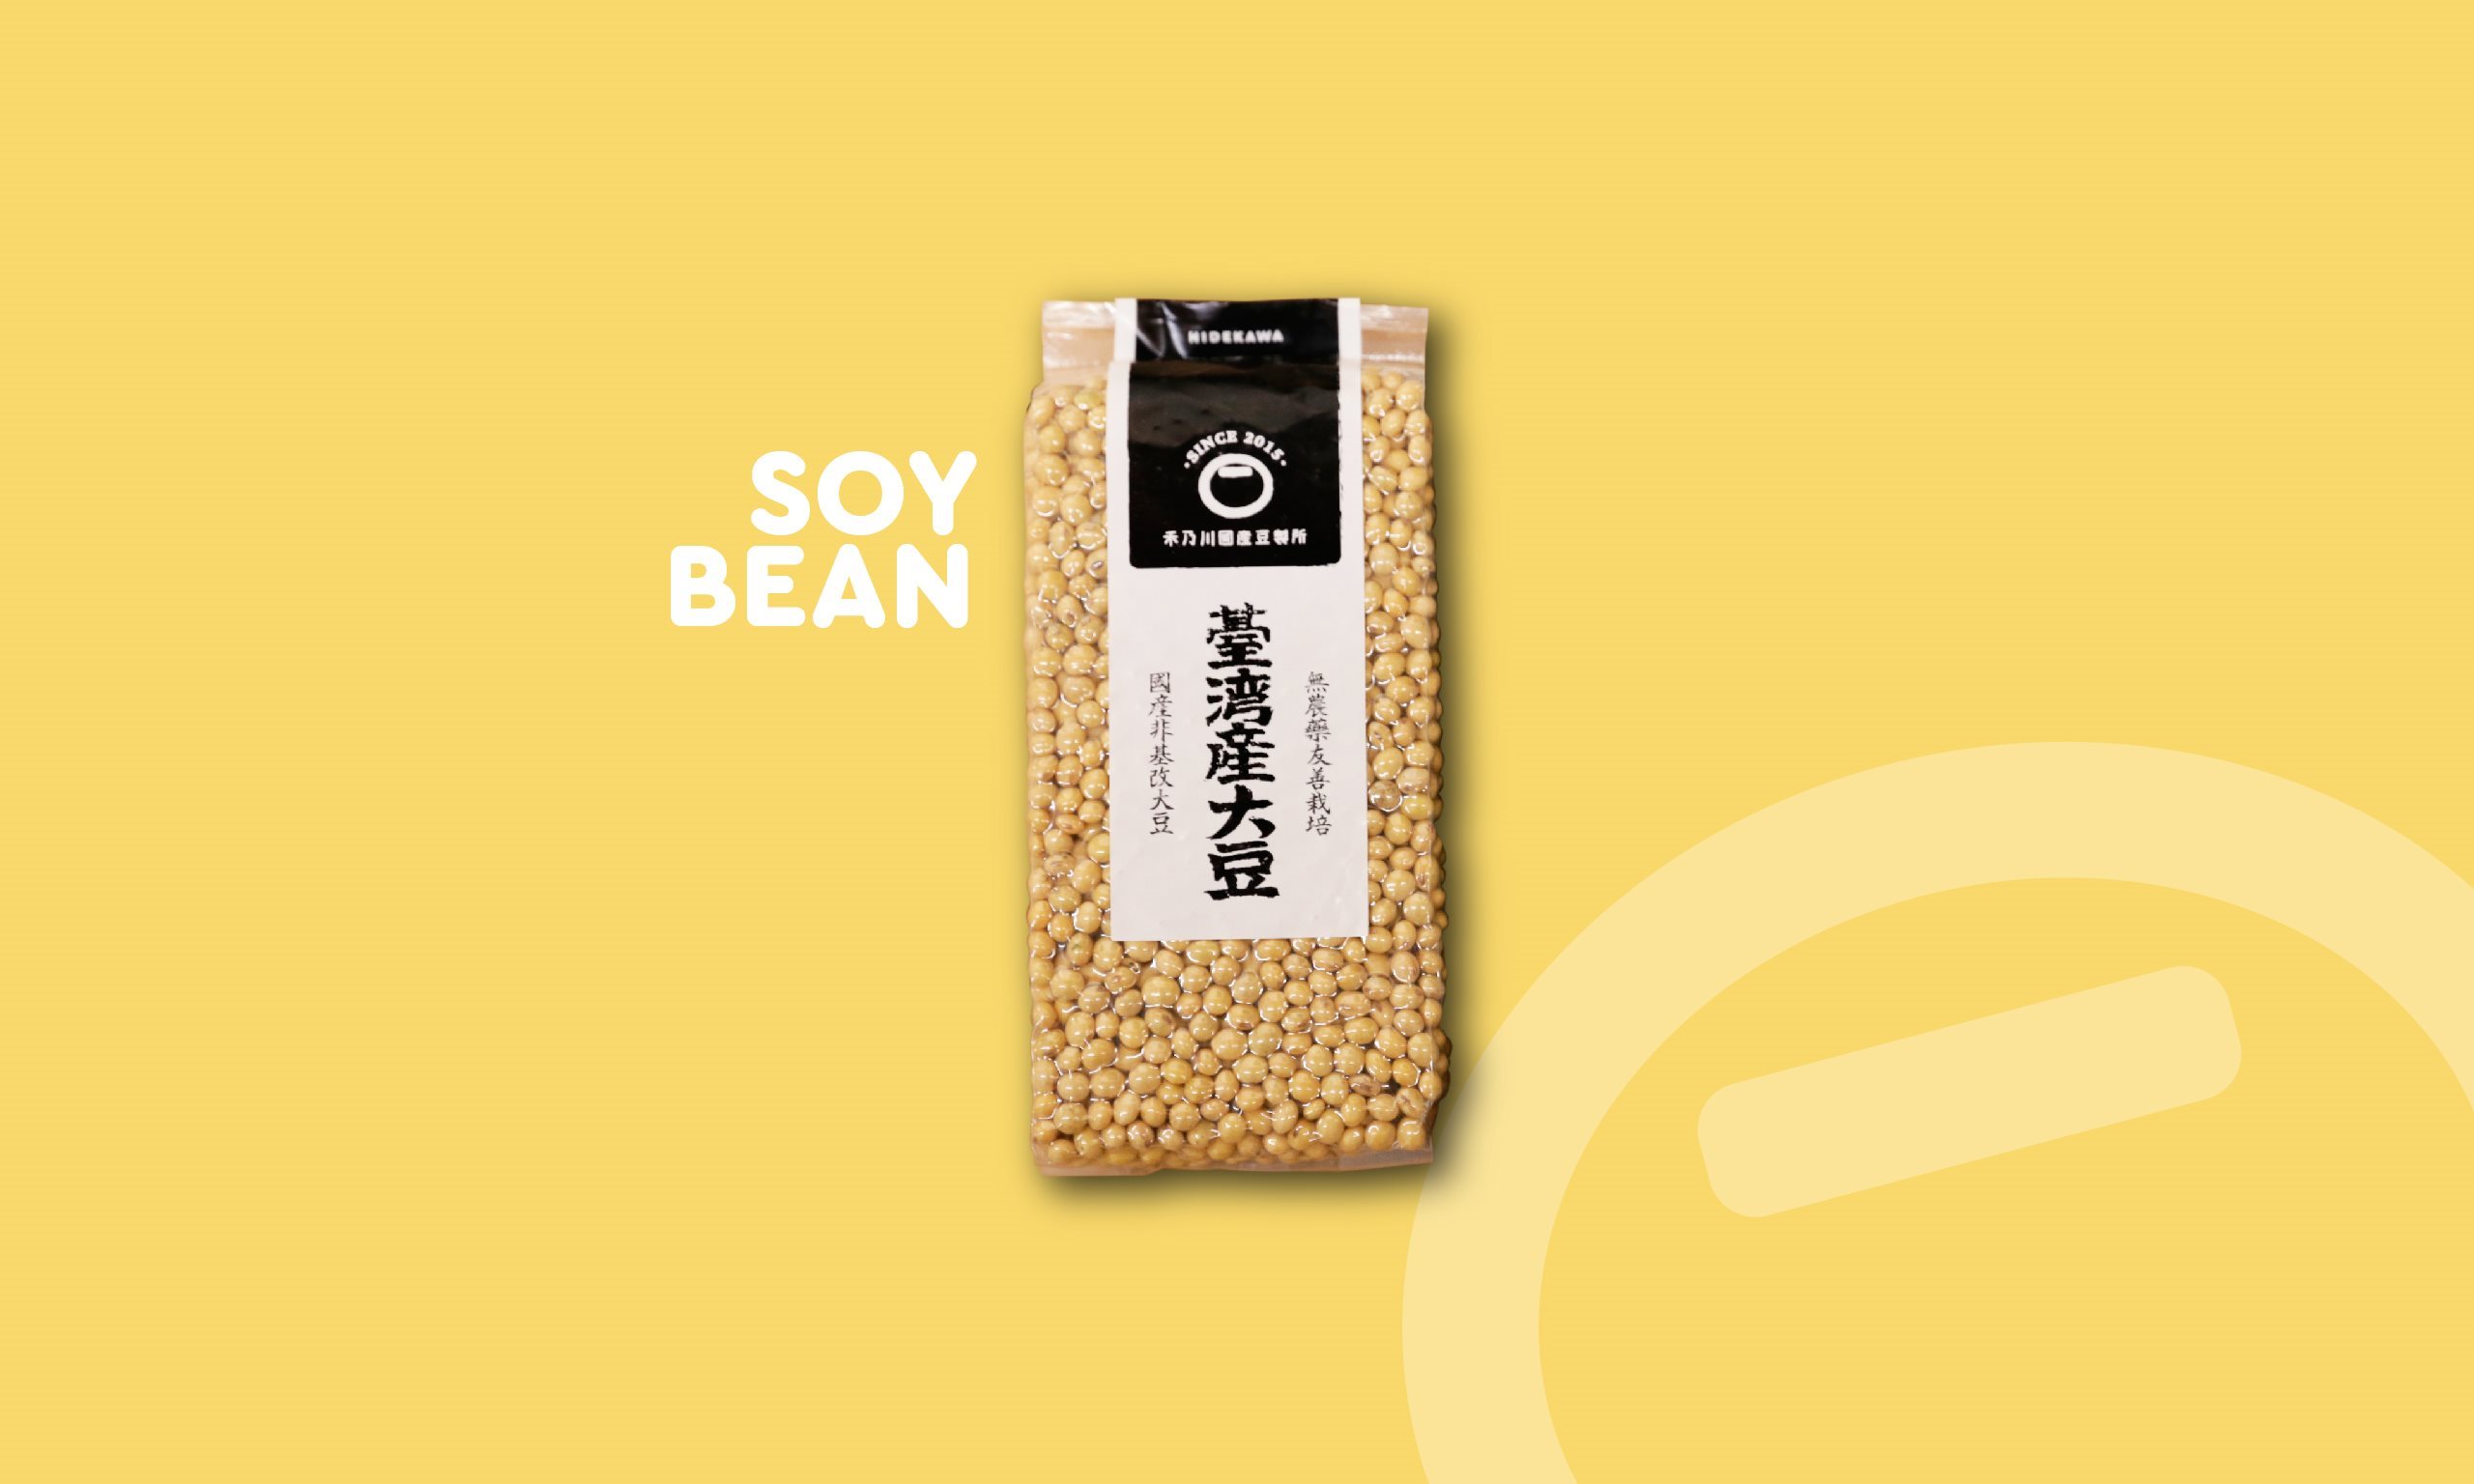 Domestic Soybeans - Taiwan best non-GMO pesticide-free soybeans